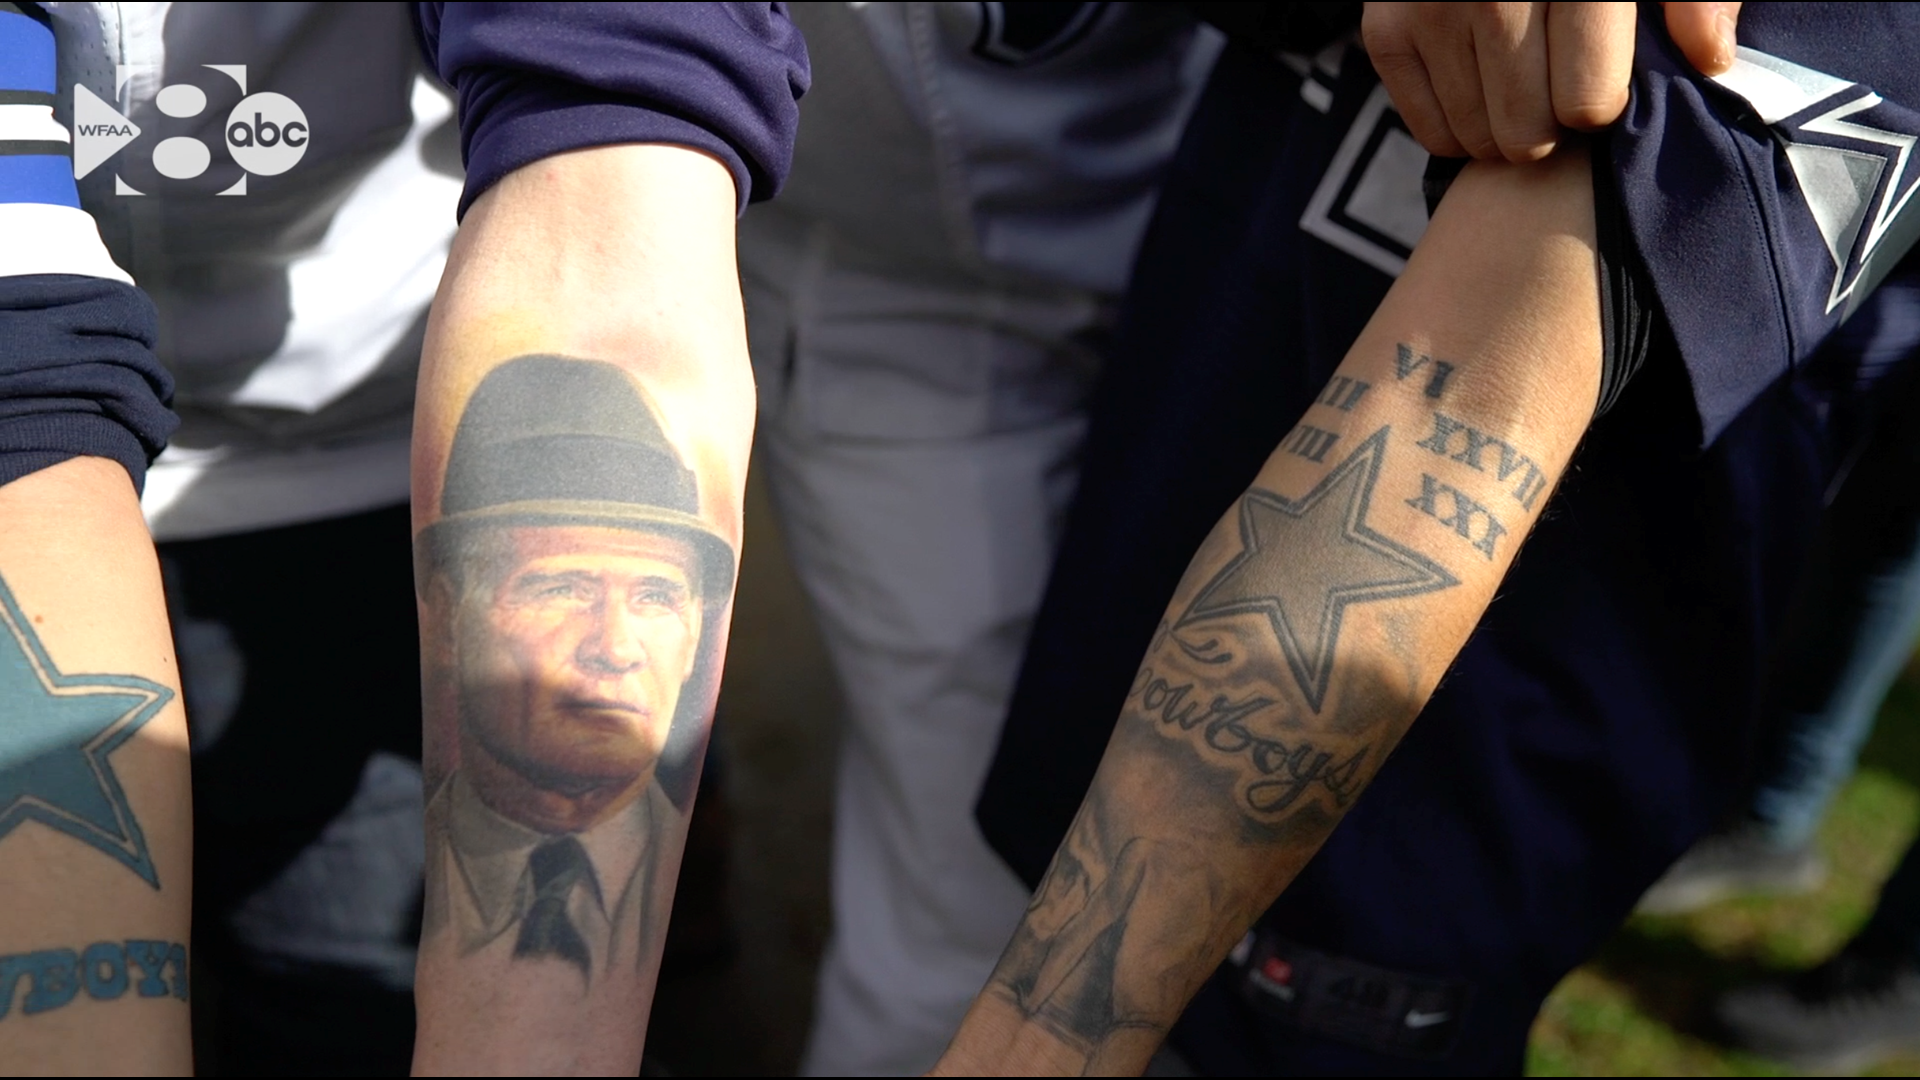 Ryan Weikum's childhood hero was Tom Landy, so he spent 13 hours under the needed getting the coaching legend tattooed on his arm.